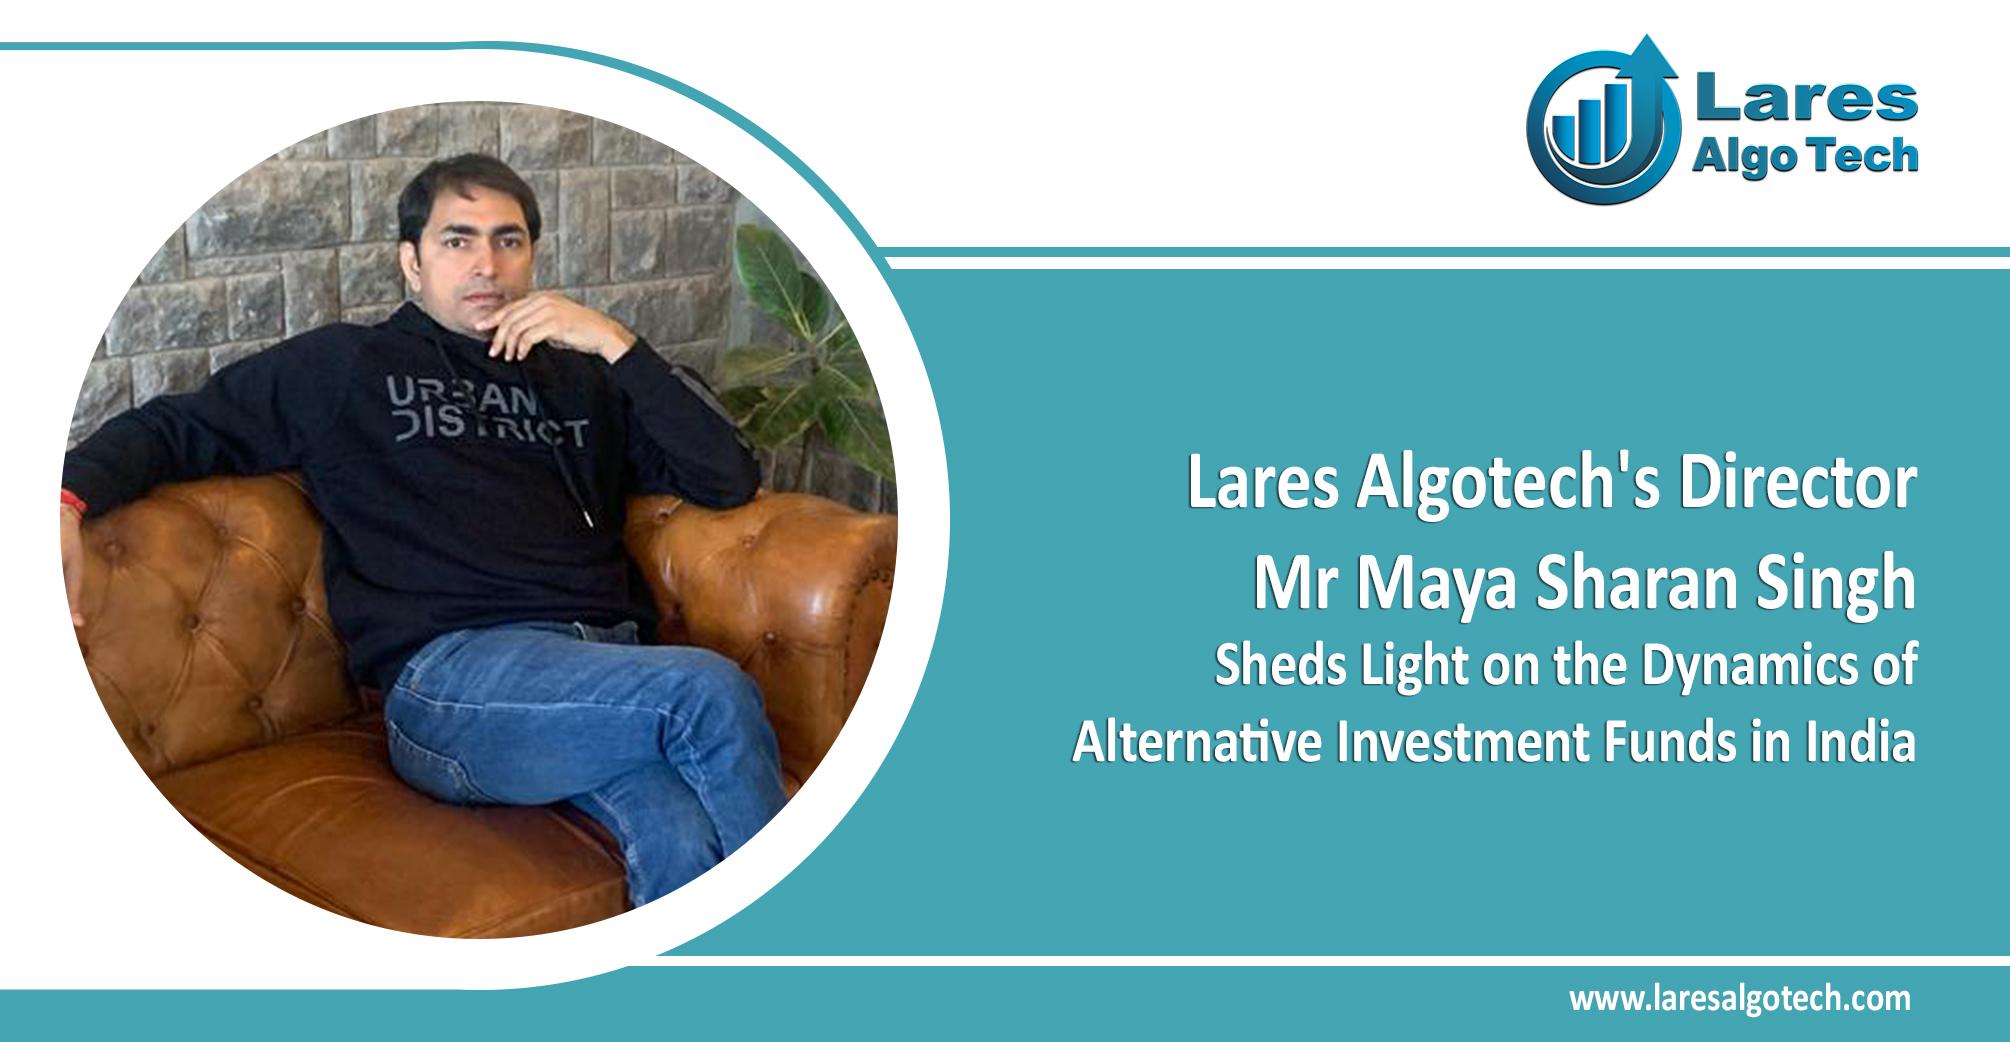 Lares Algotech's Director Mr Maya Sharan Singh Sheds Light On The Dynamics Of Alternative Investment Funds In India